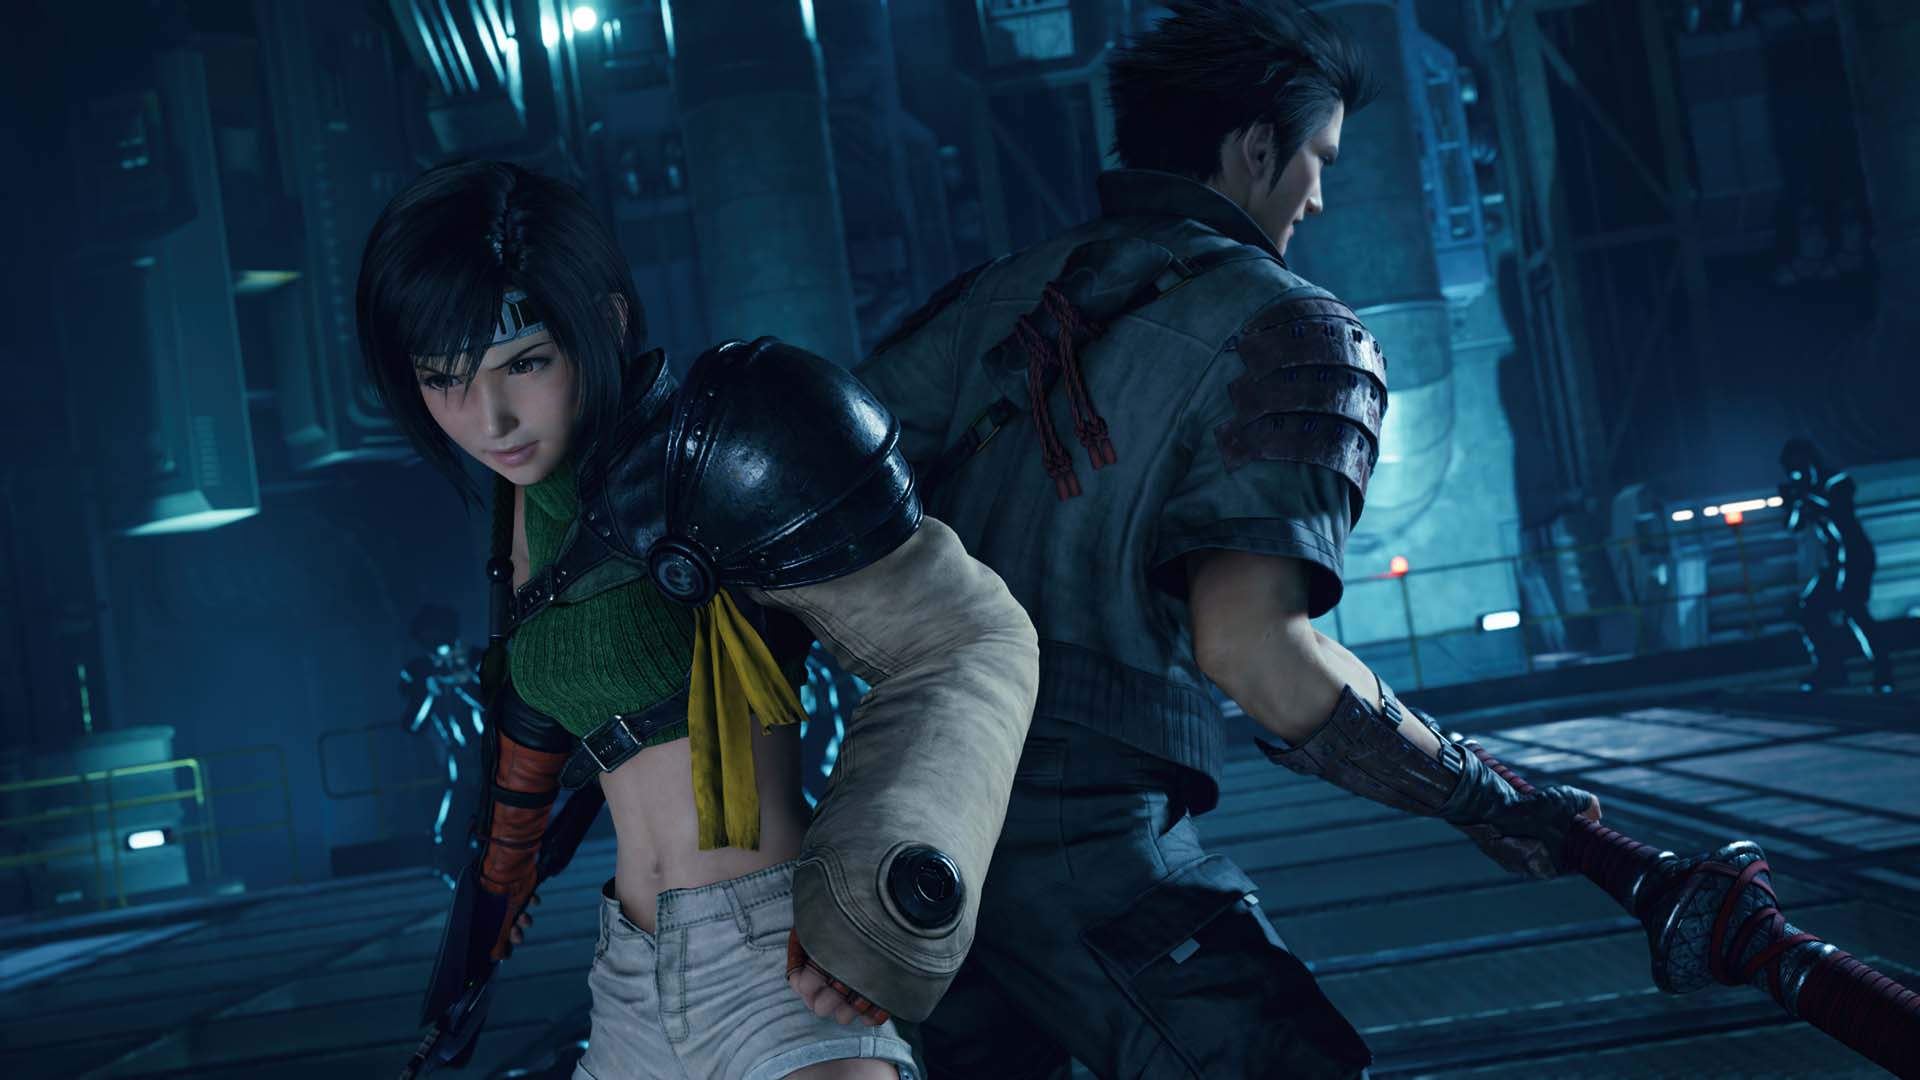 Final Fantasy VII Remake - EPISODE INTERmission (New Story Content Featuring Yuffie) DLC EU PS5 CD Key 11.29 usd